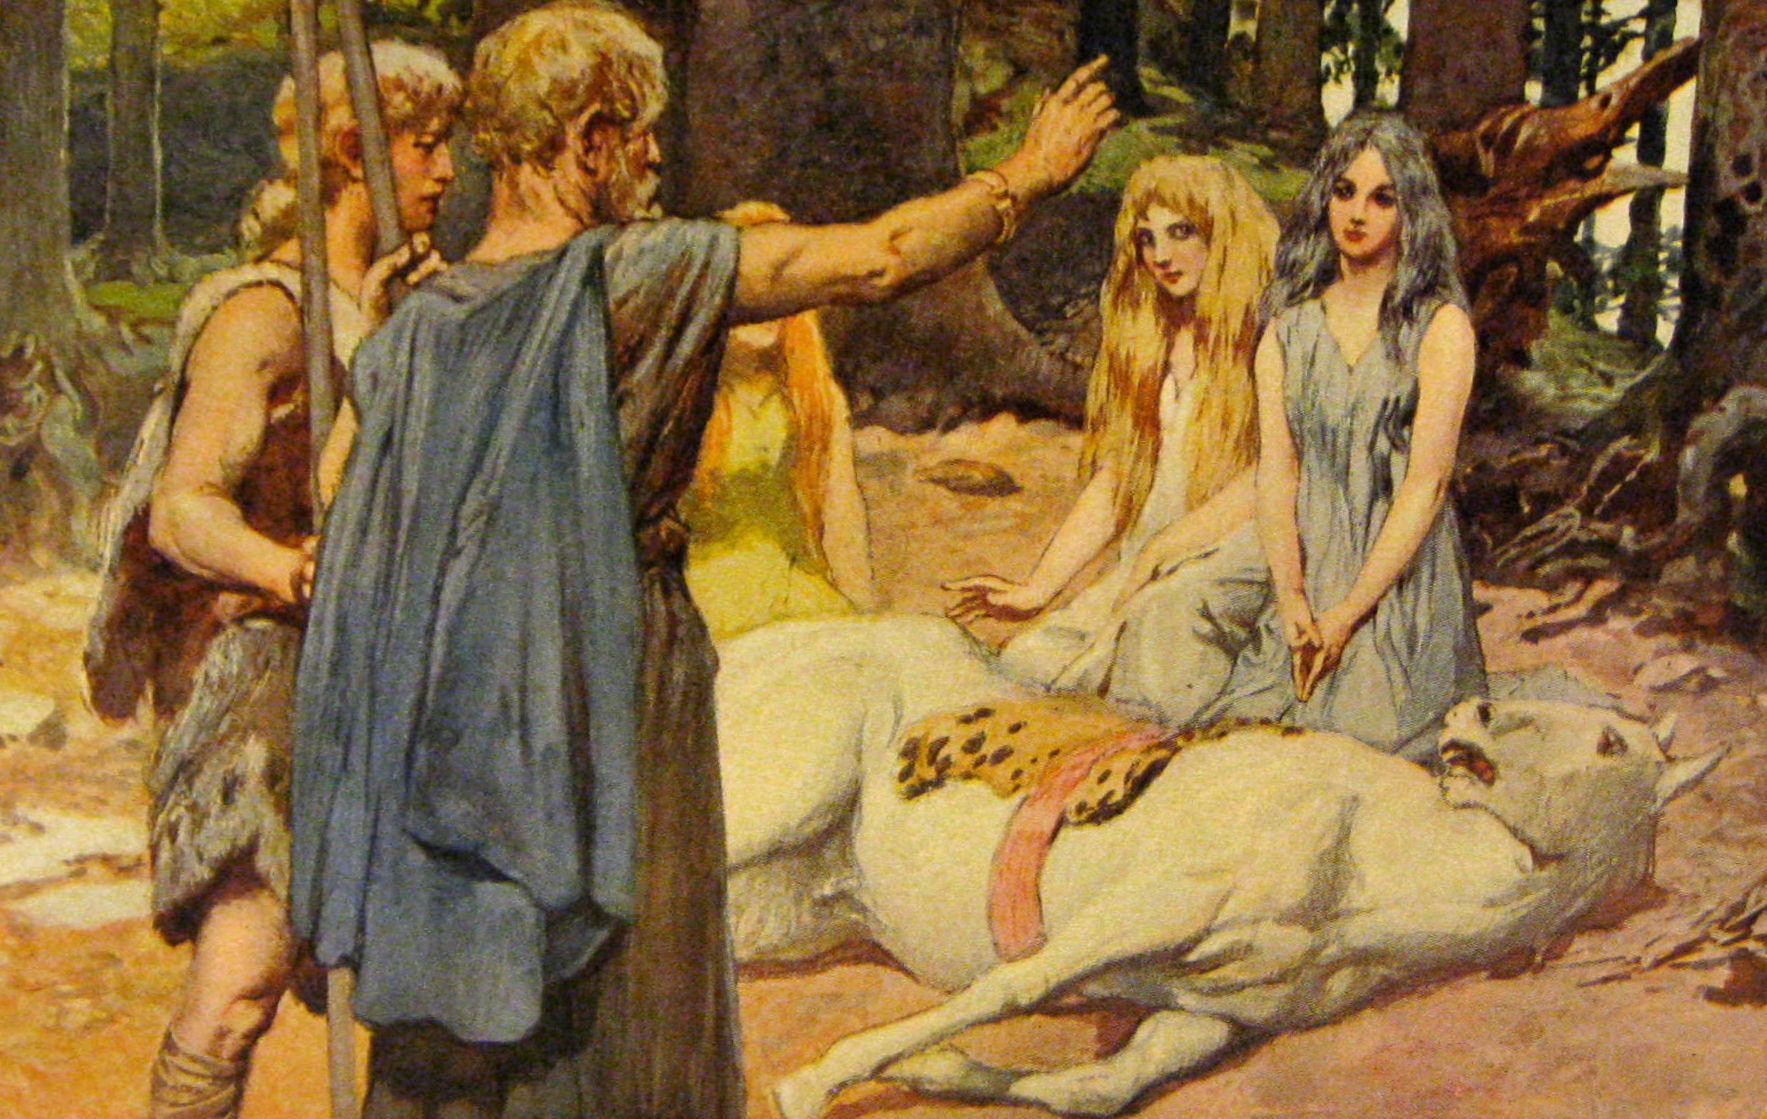 A god heals a wounded horse as three goddesses watch nearby